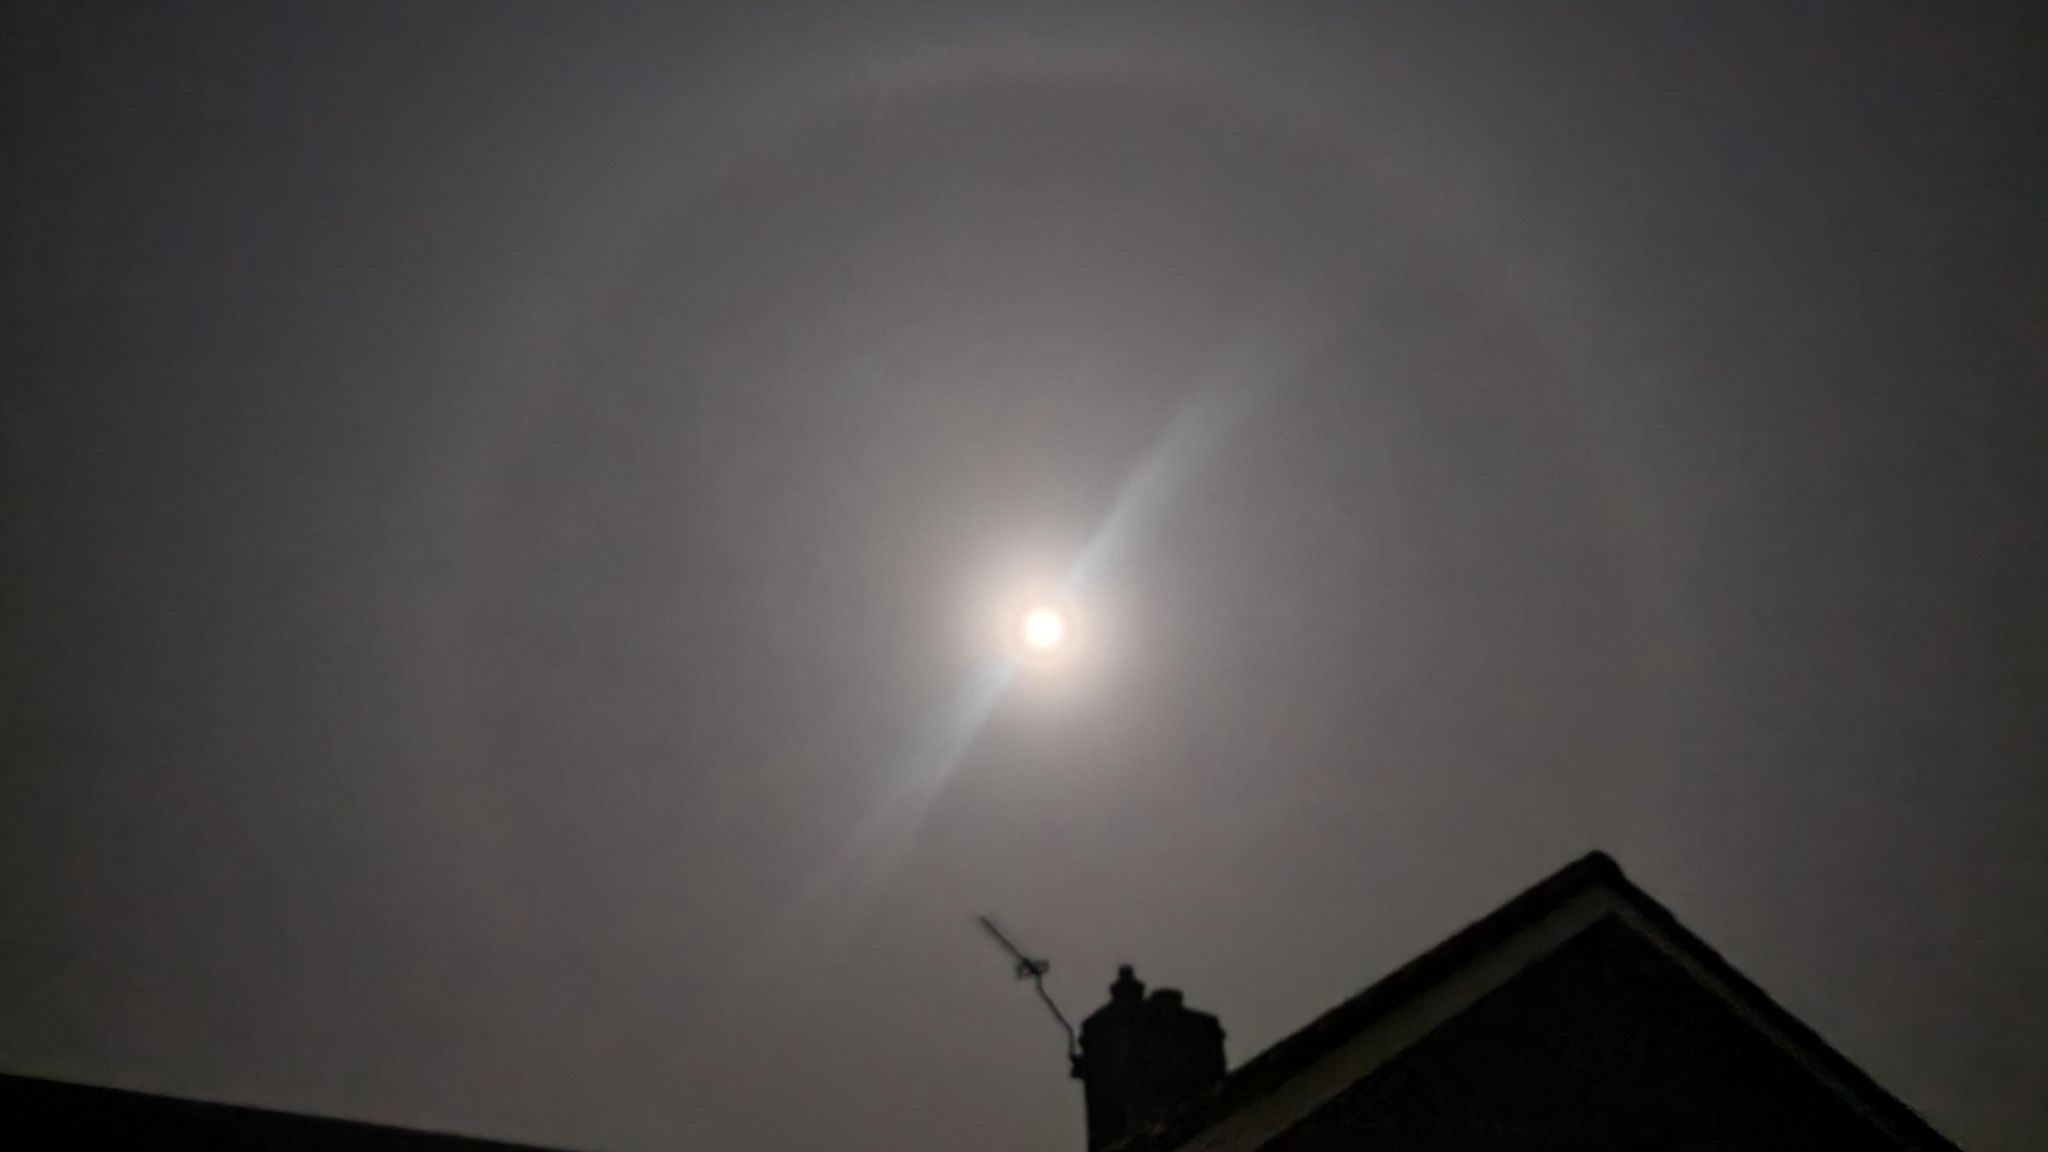 Live: Perfect lunar halo encircles moon in skies above Stoke-on-Trent -  Stoke-on-Trent Live